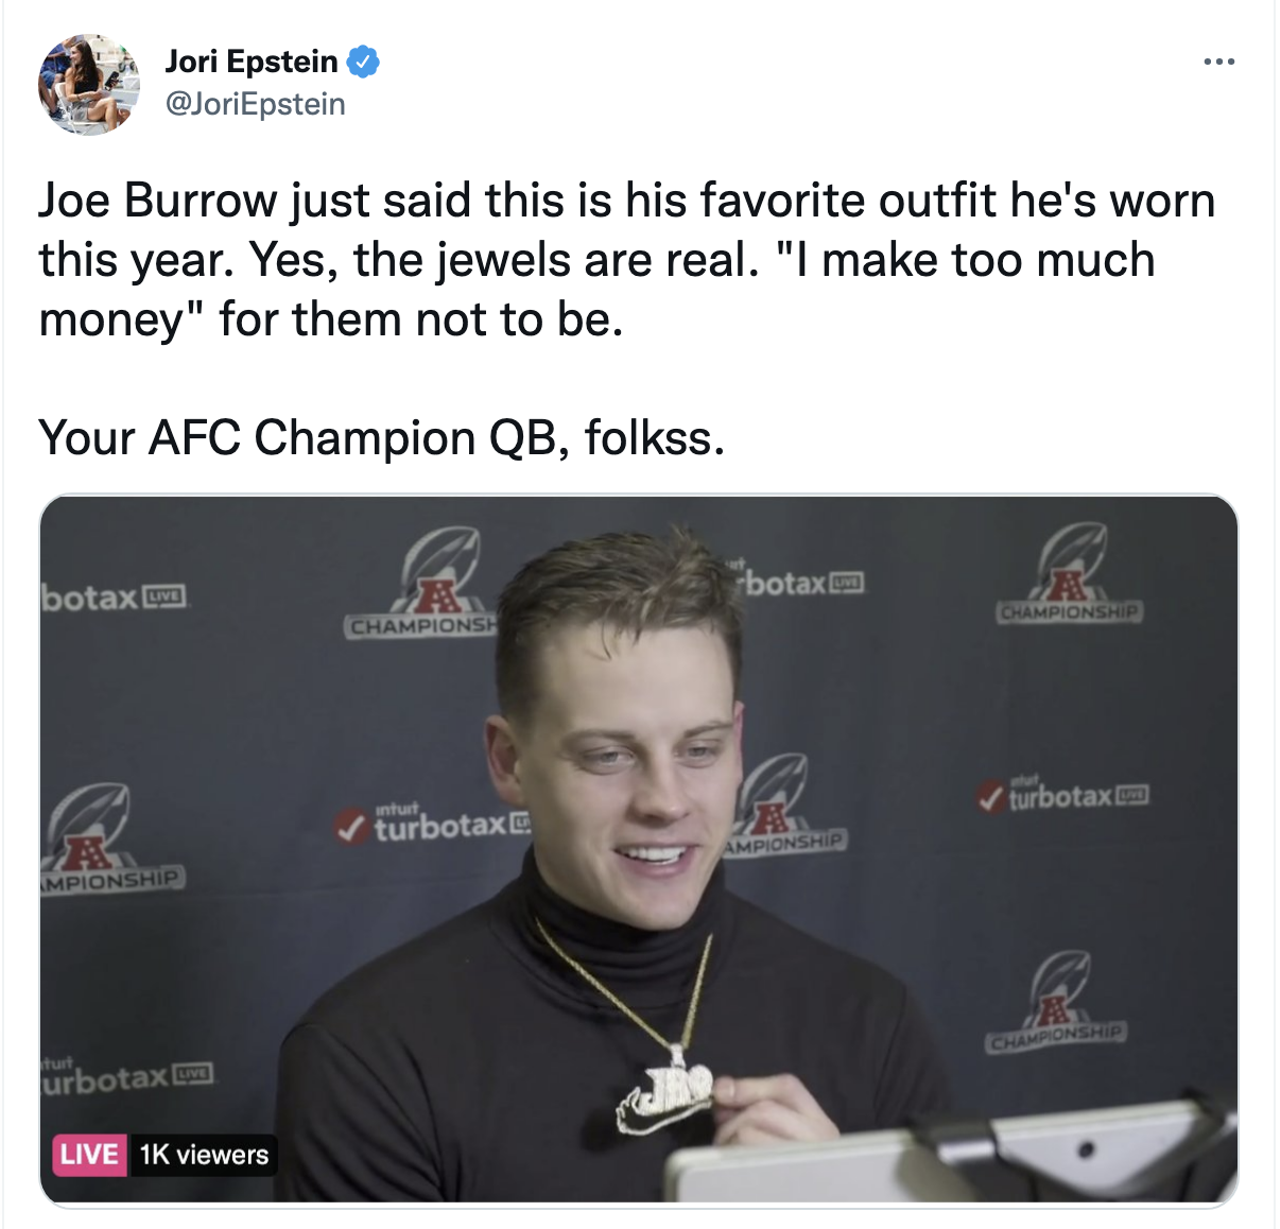 Twitter Both Loved and Hated Joe Cool's Drip at the AFC Championship Game